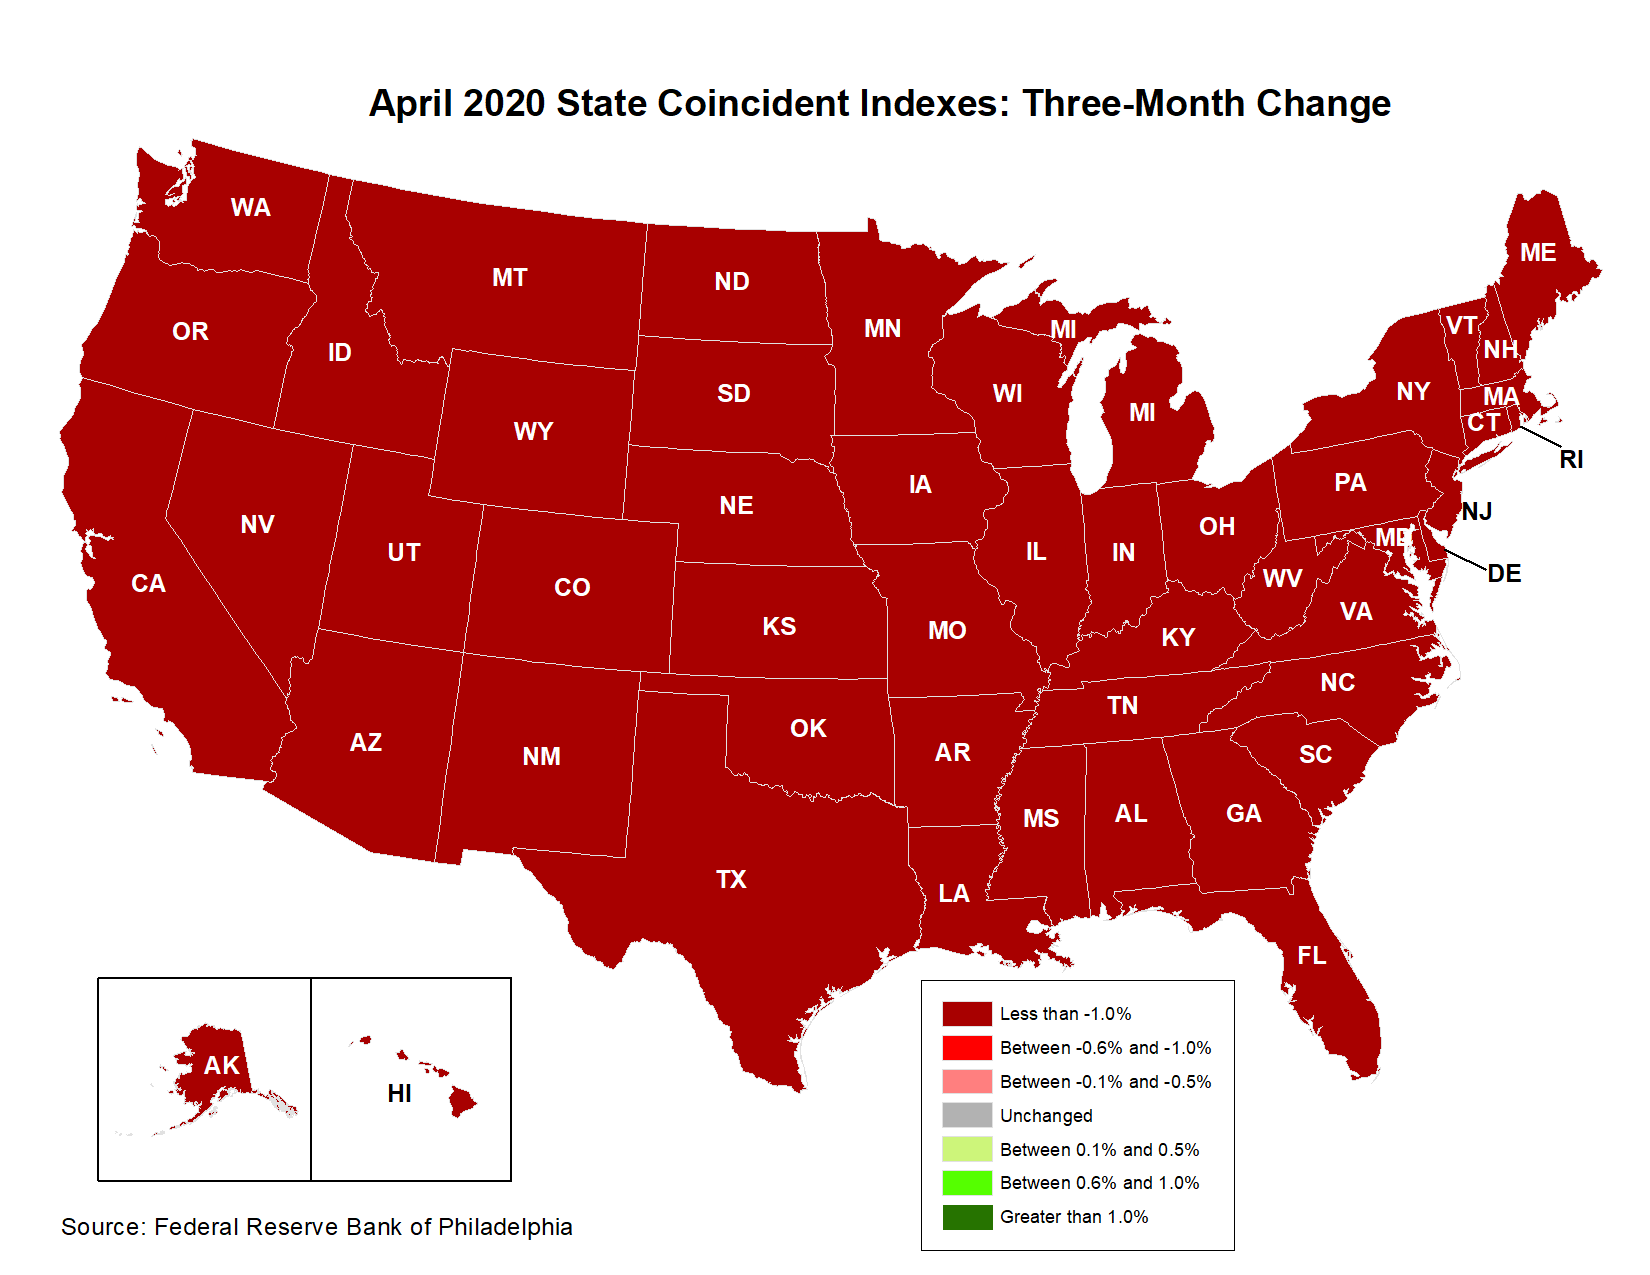 Map of the U.S. showing the State Coincident Indexes Three-Month Change in April 2020